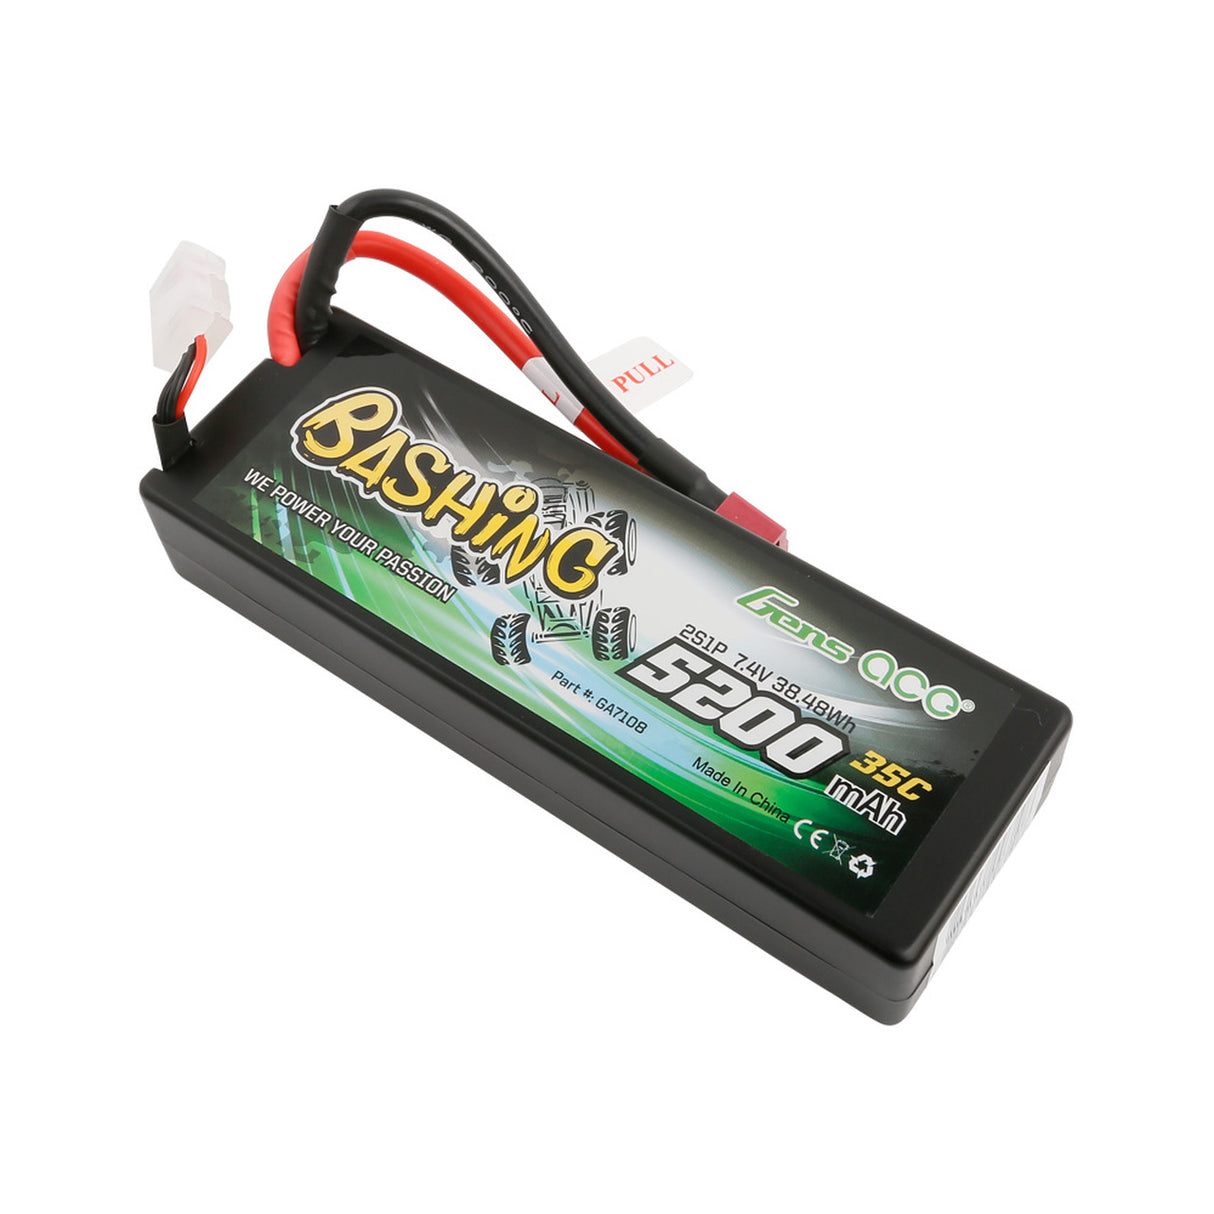 Gens Ace 5200mah 2S 7.4v 35C Hardcase Lipo Battery with Deans connector, a high-capacity rechargeable power source for RC devices.